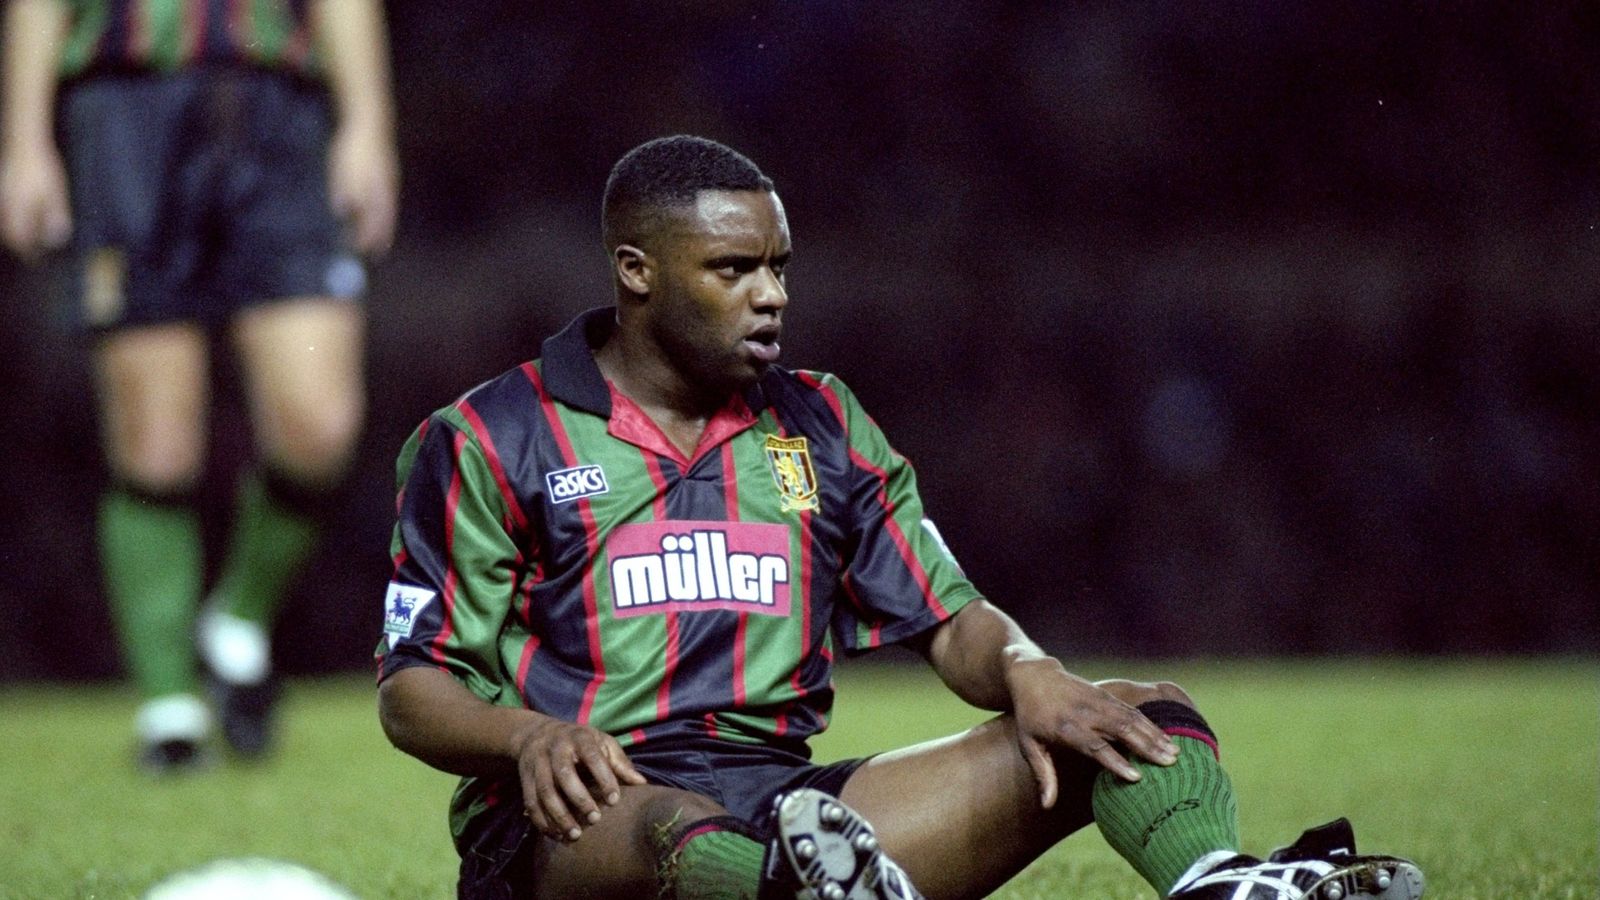 Dalian Atkinson's Football Career In Pictures1600 x 900